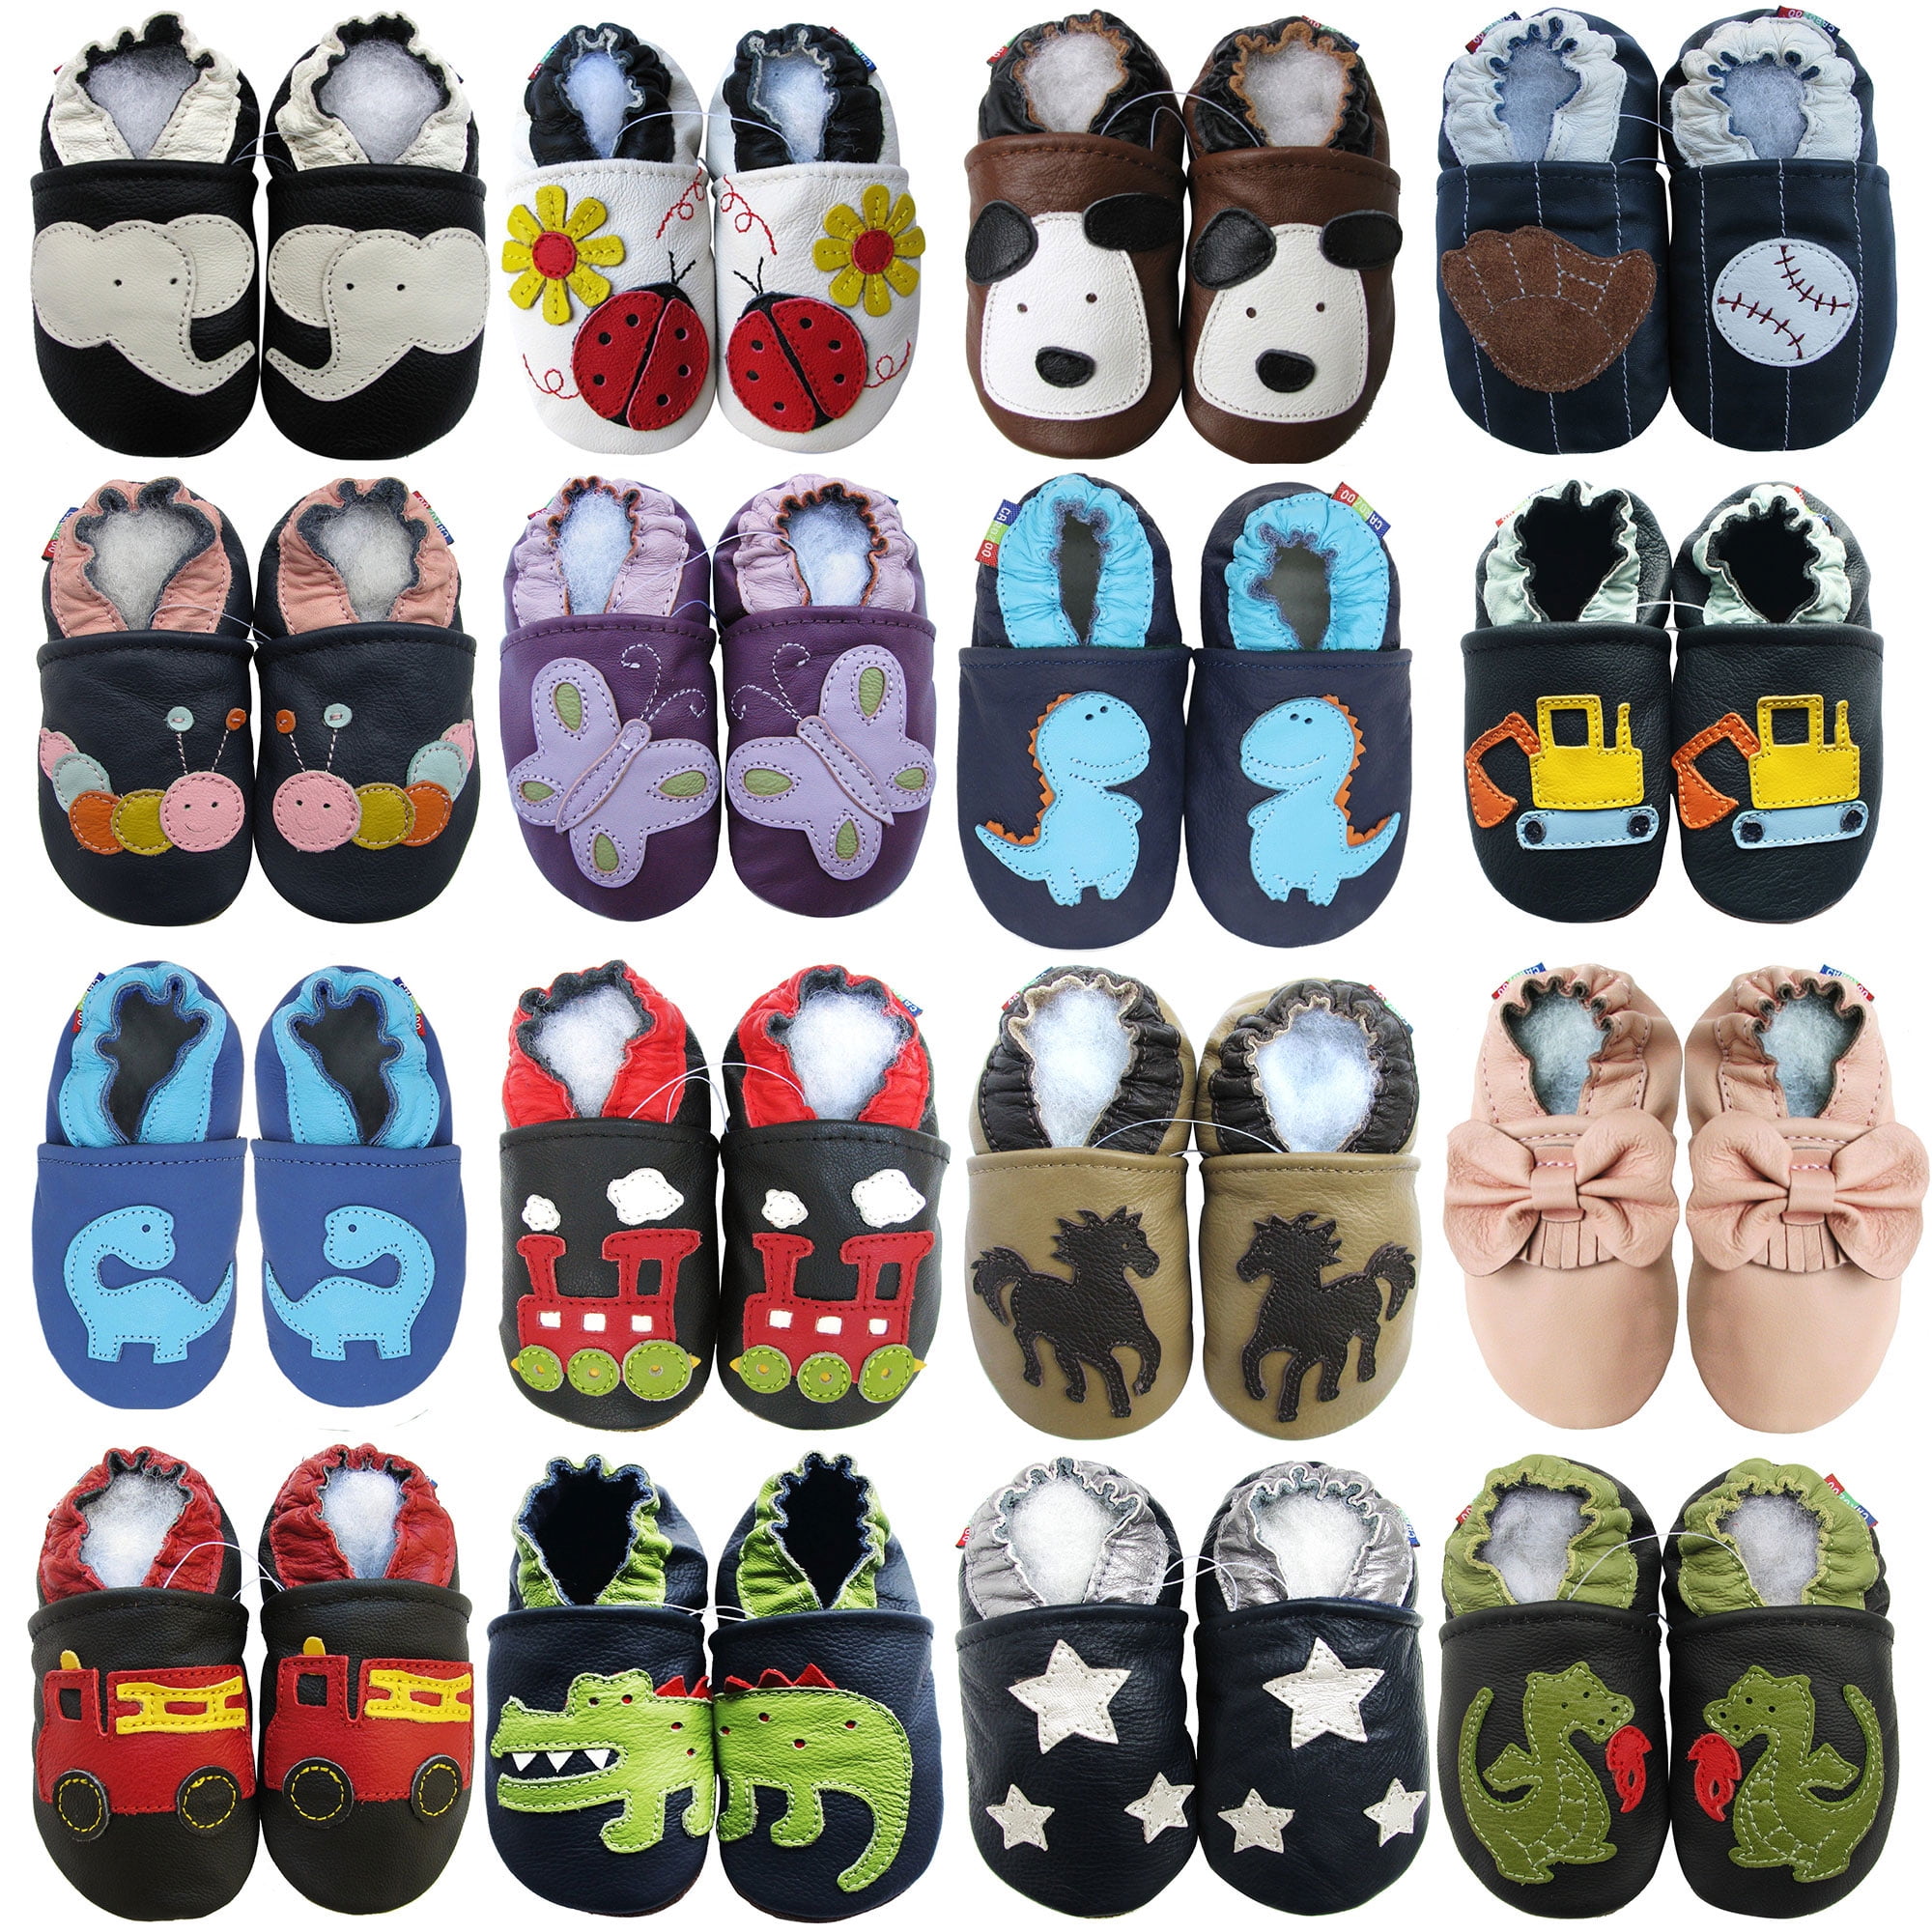 Carozoo Dinosaur Butterfly Soft Sole Leather Baby Kid Boy Girl Shoes ...